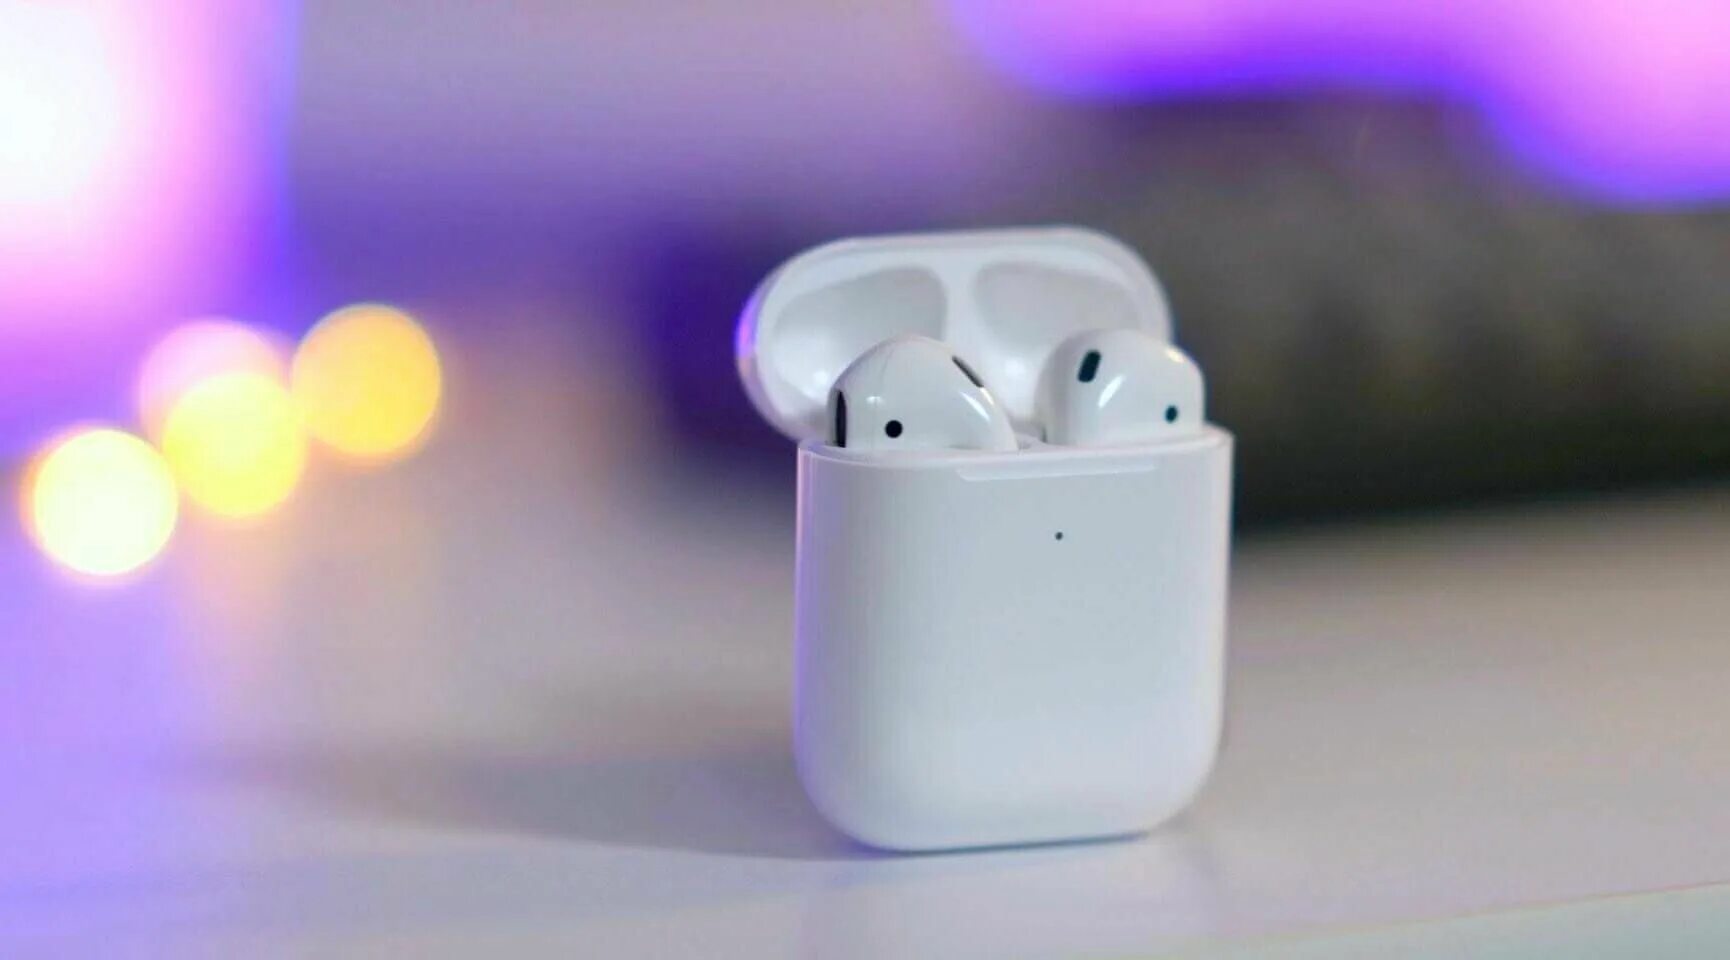 Apple AIRPODS 2. Apple AIRPODS Pro 2. Наушники TWS Apple AIRPODS 2. Apple AIRPODS Pro 3. Iphone airpods 1